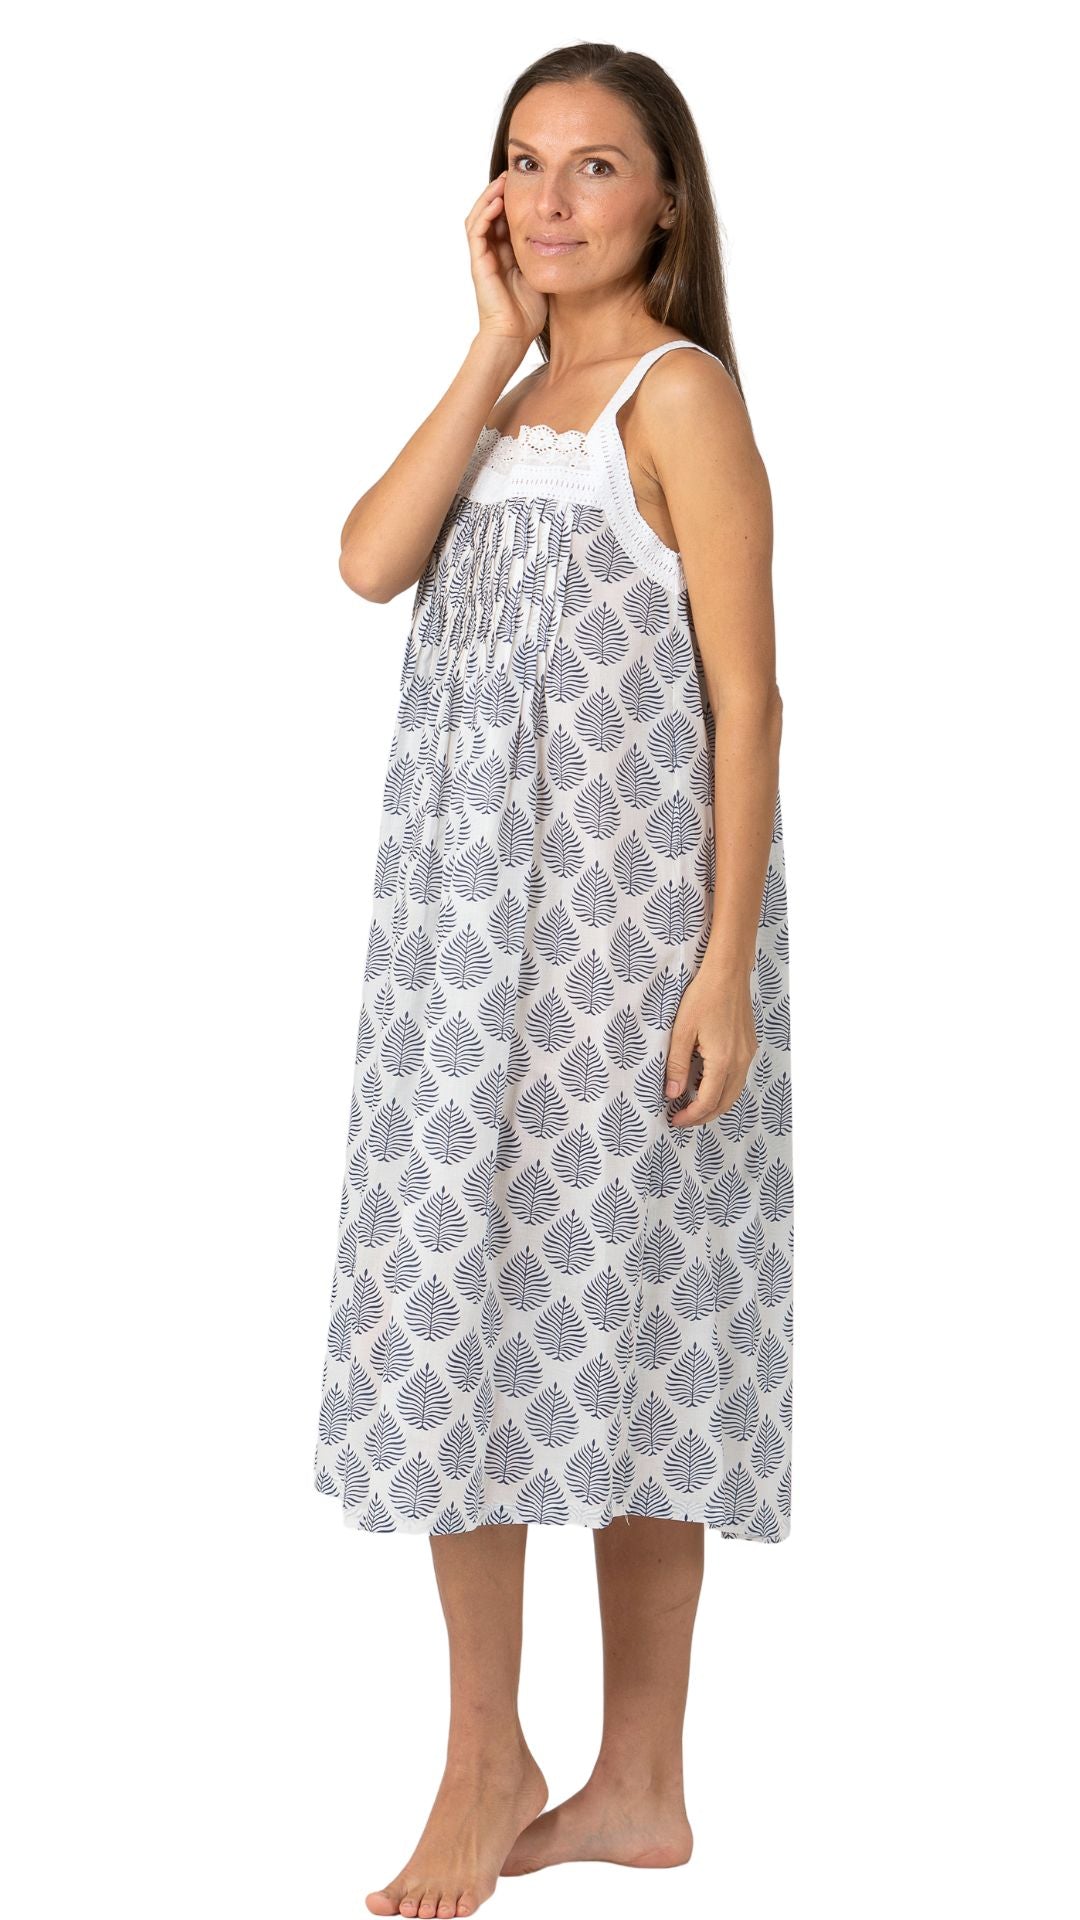 Women's nighties for holidays or hospital stays from Australia